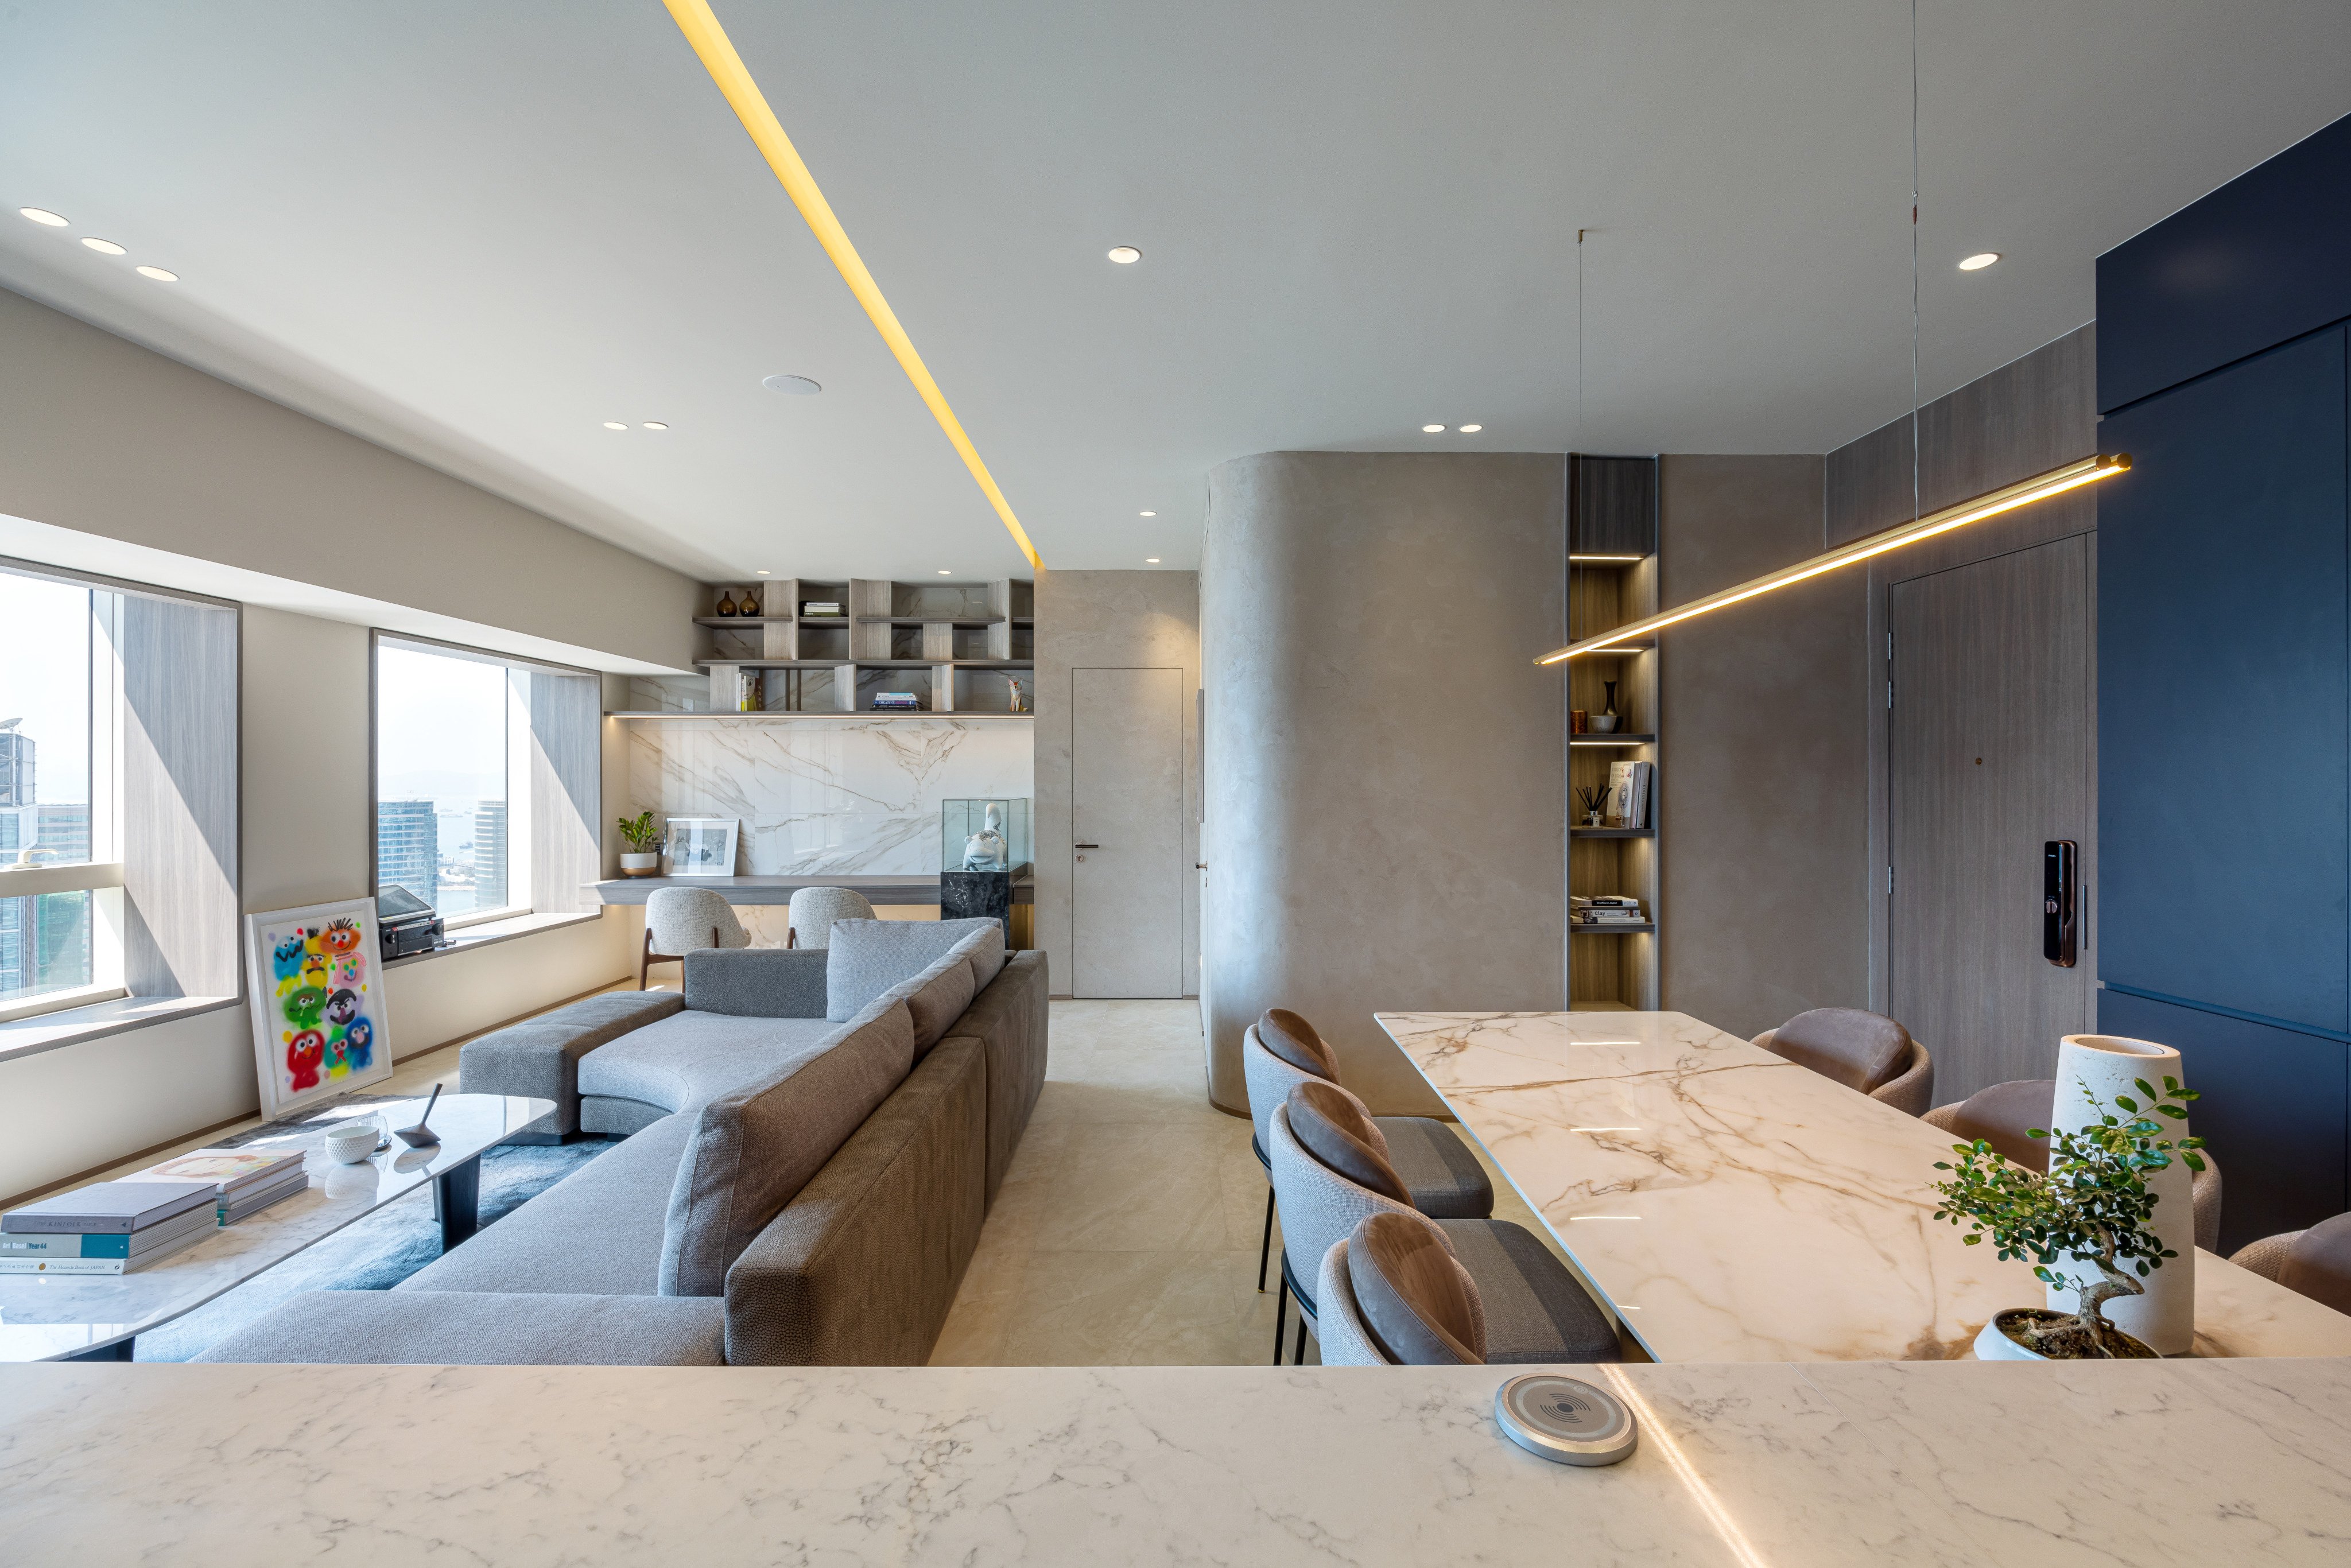 A couple looking to replicate their New York apartment in Hong Kong found a Tsim Sha Tsui flat offering similar views, and asked an interior designer to help them make it feel like home. Photo: Dick L